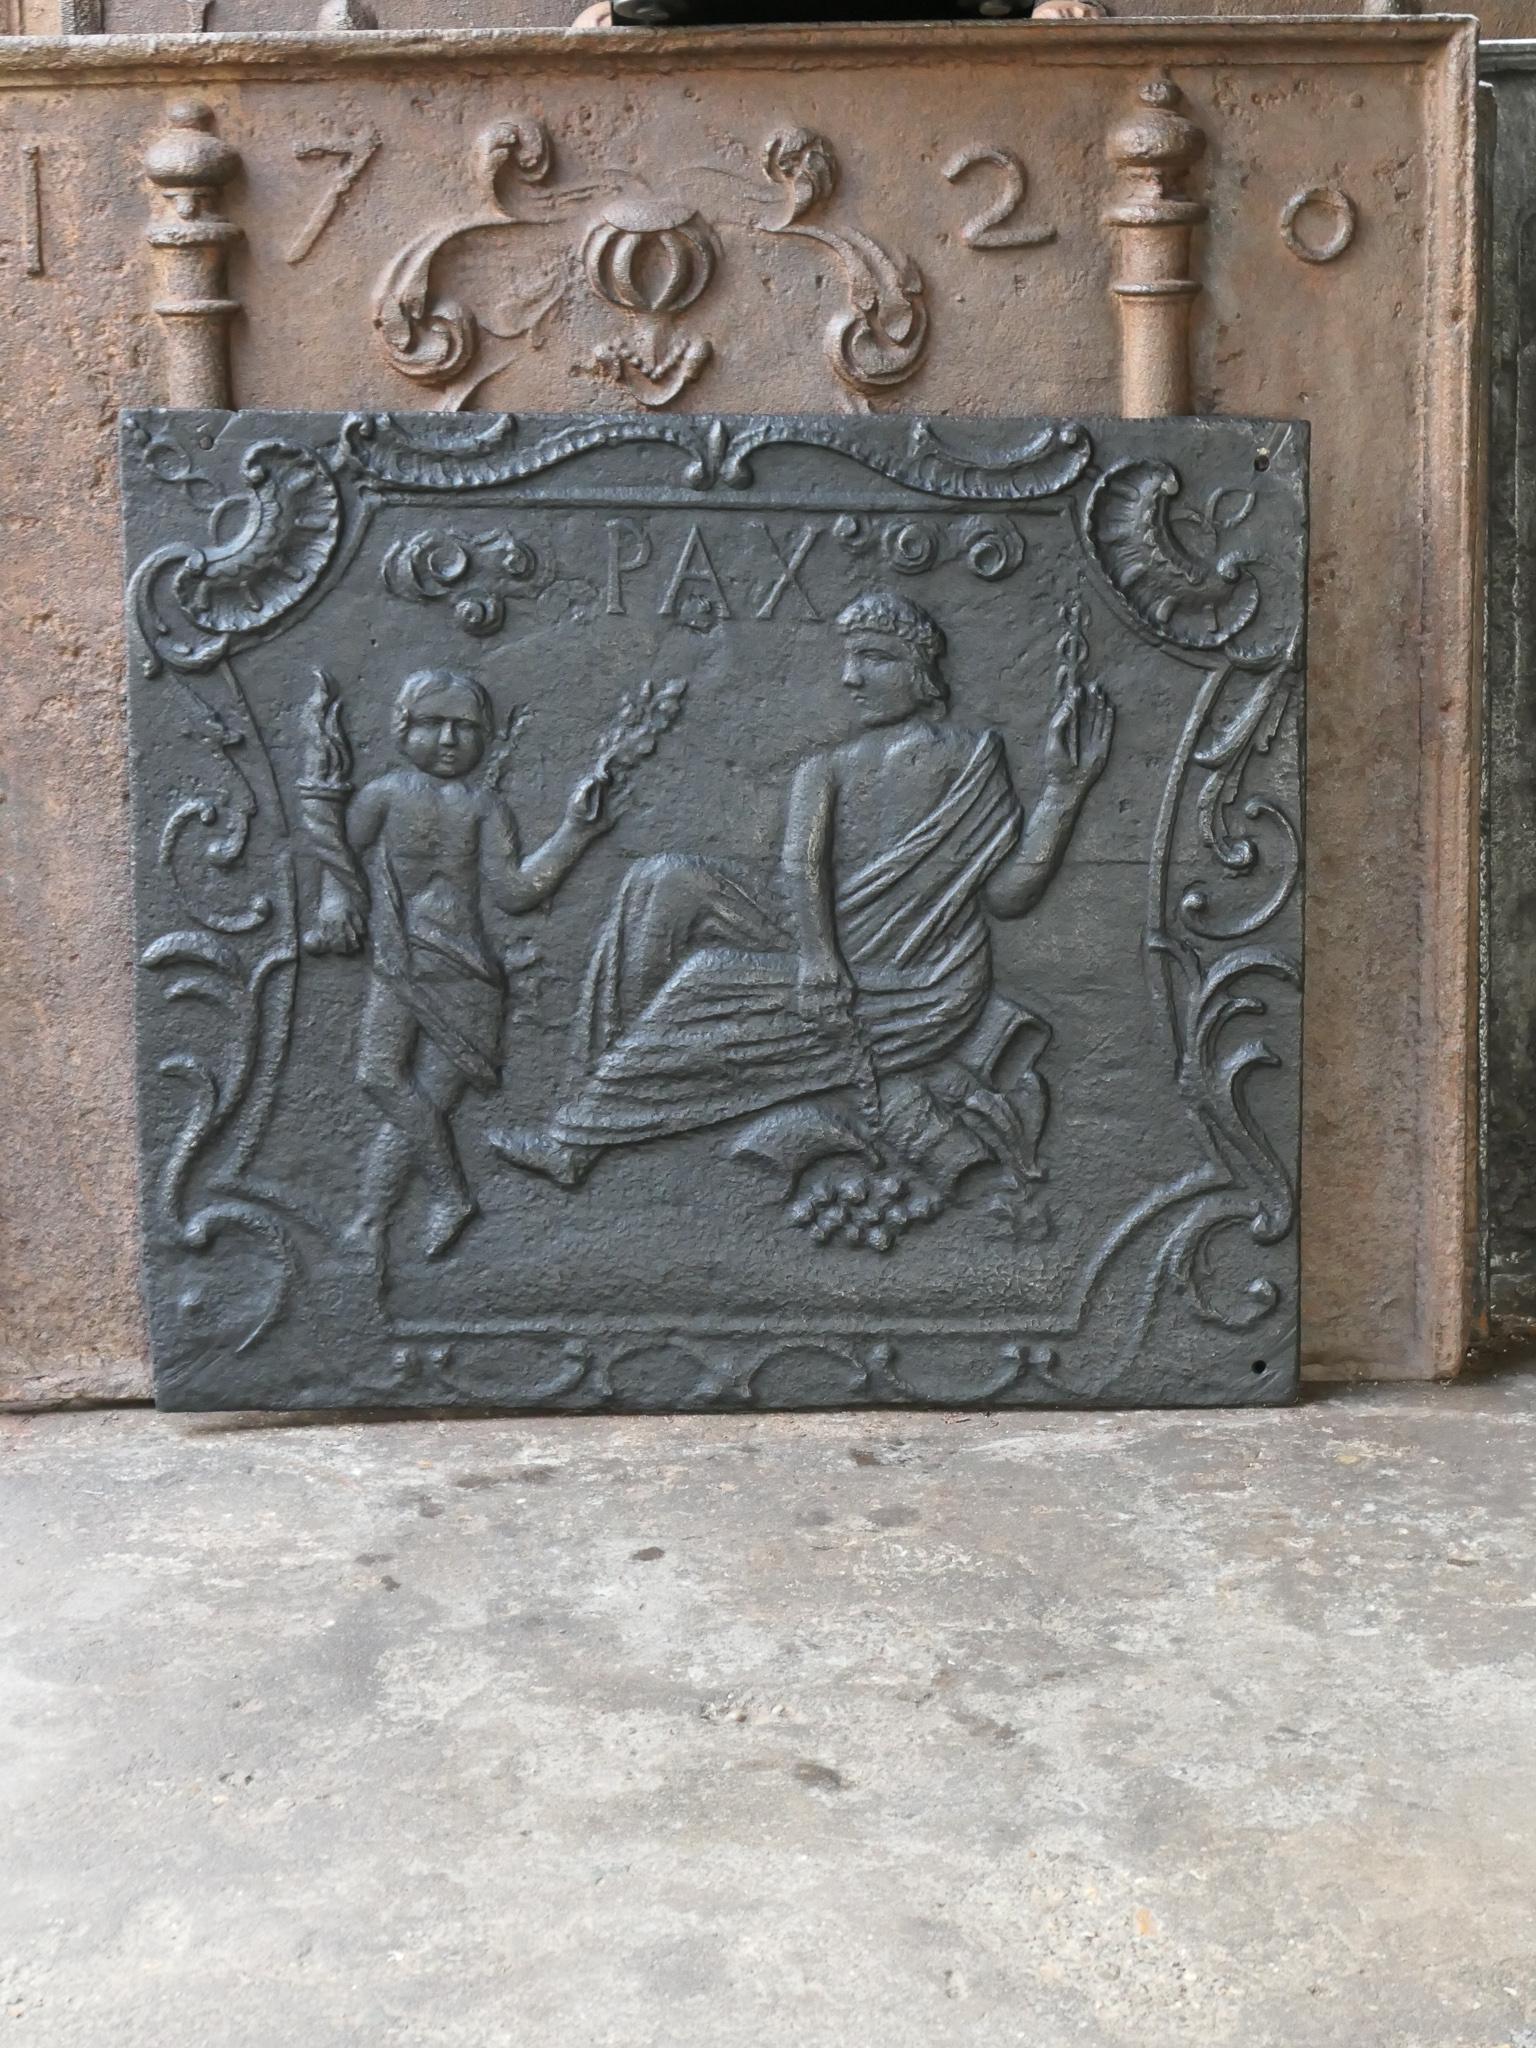 18th Century French Louis XV fireback with an Allegory of Peace. The Allegory of Peace is holding an olive branche, symbol for peace, and a laurel wreath, symbol for victory, in her hands. The fireback is made of cast iron and has a black / pewter